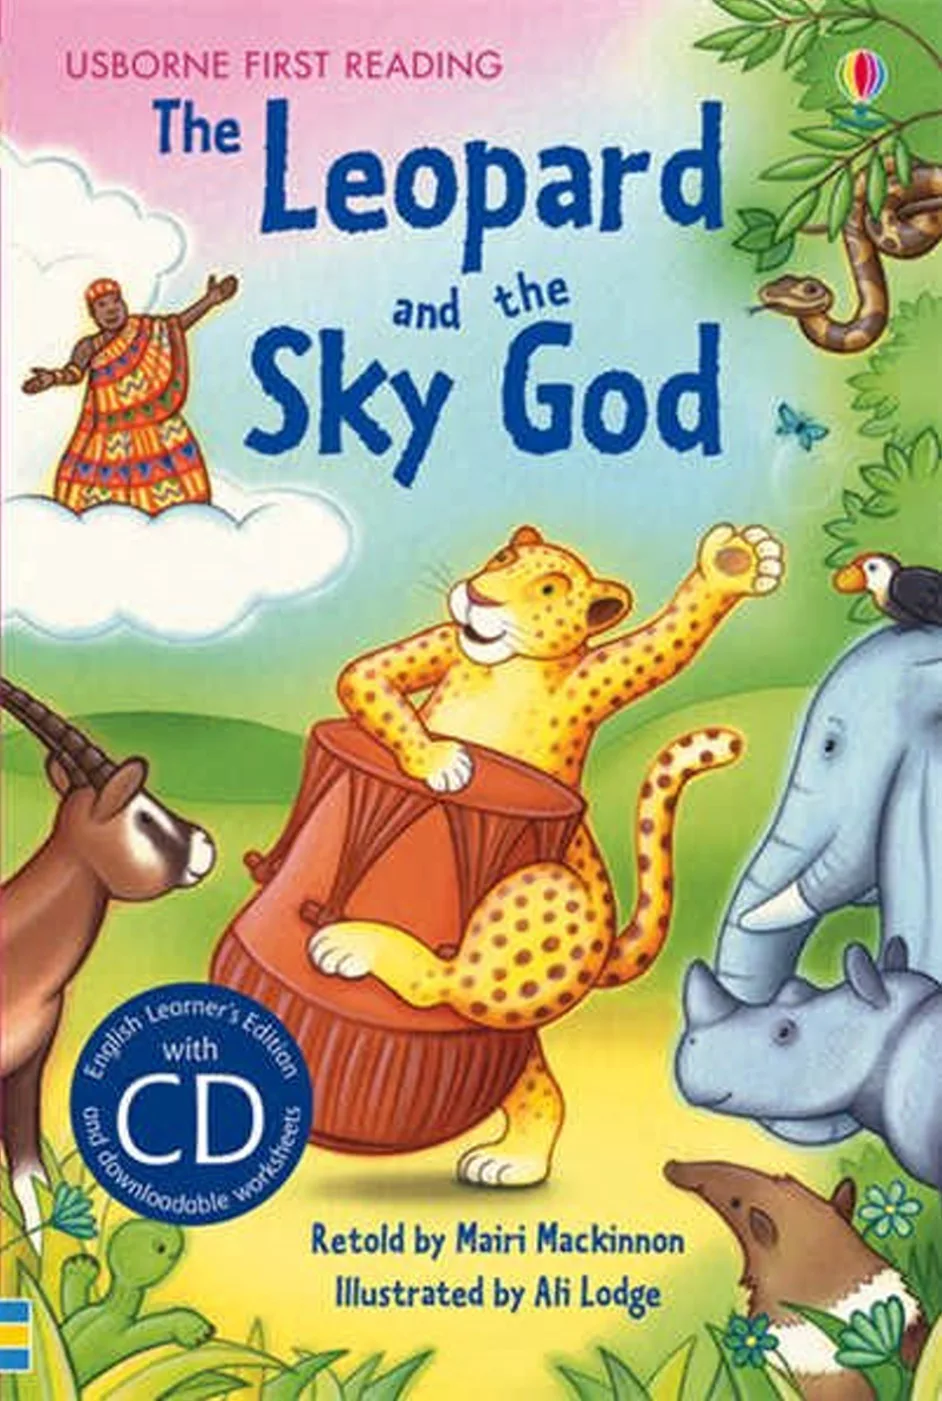 The Leopard and the Sky God (with CD) (Usborne English Learners’ Editions: Lower Intermediate)